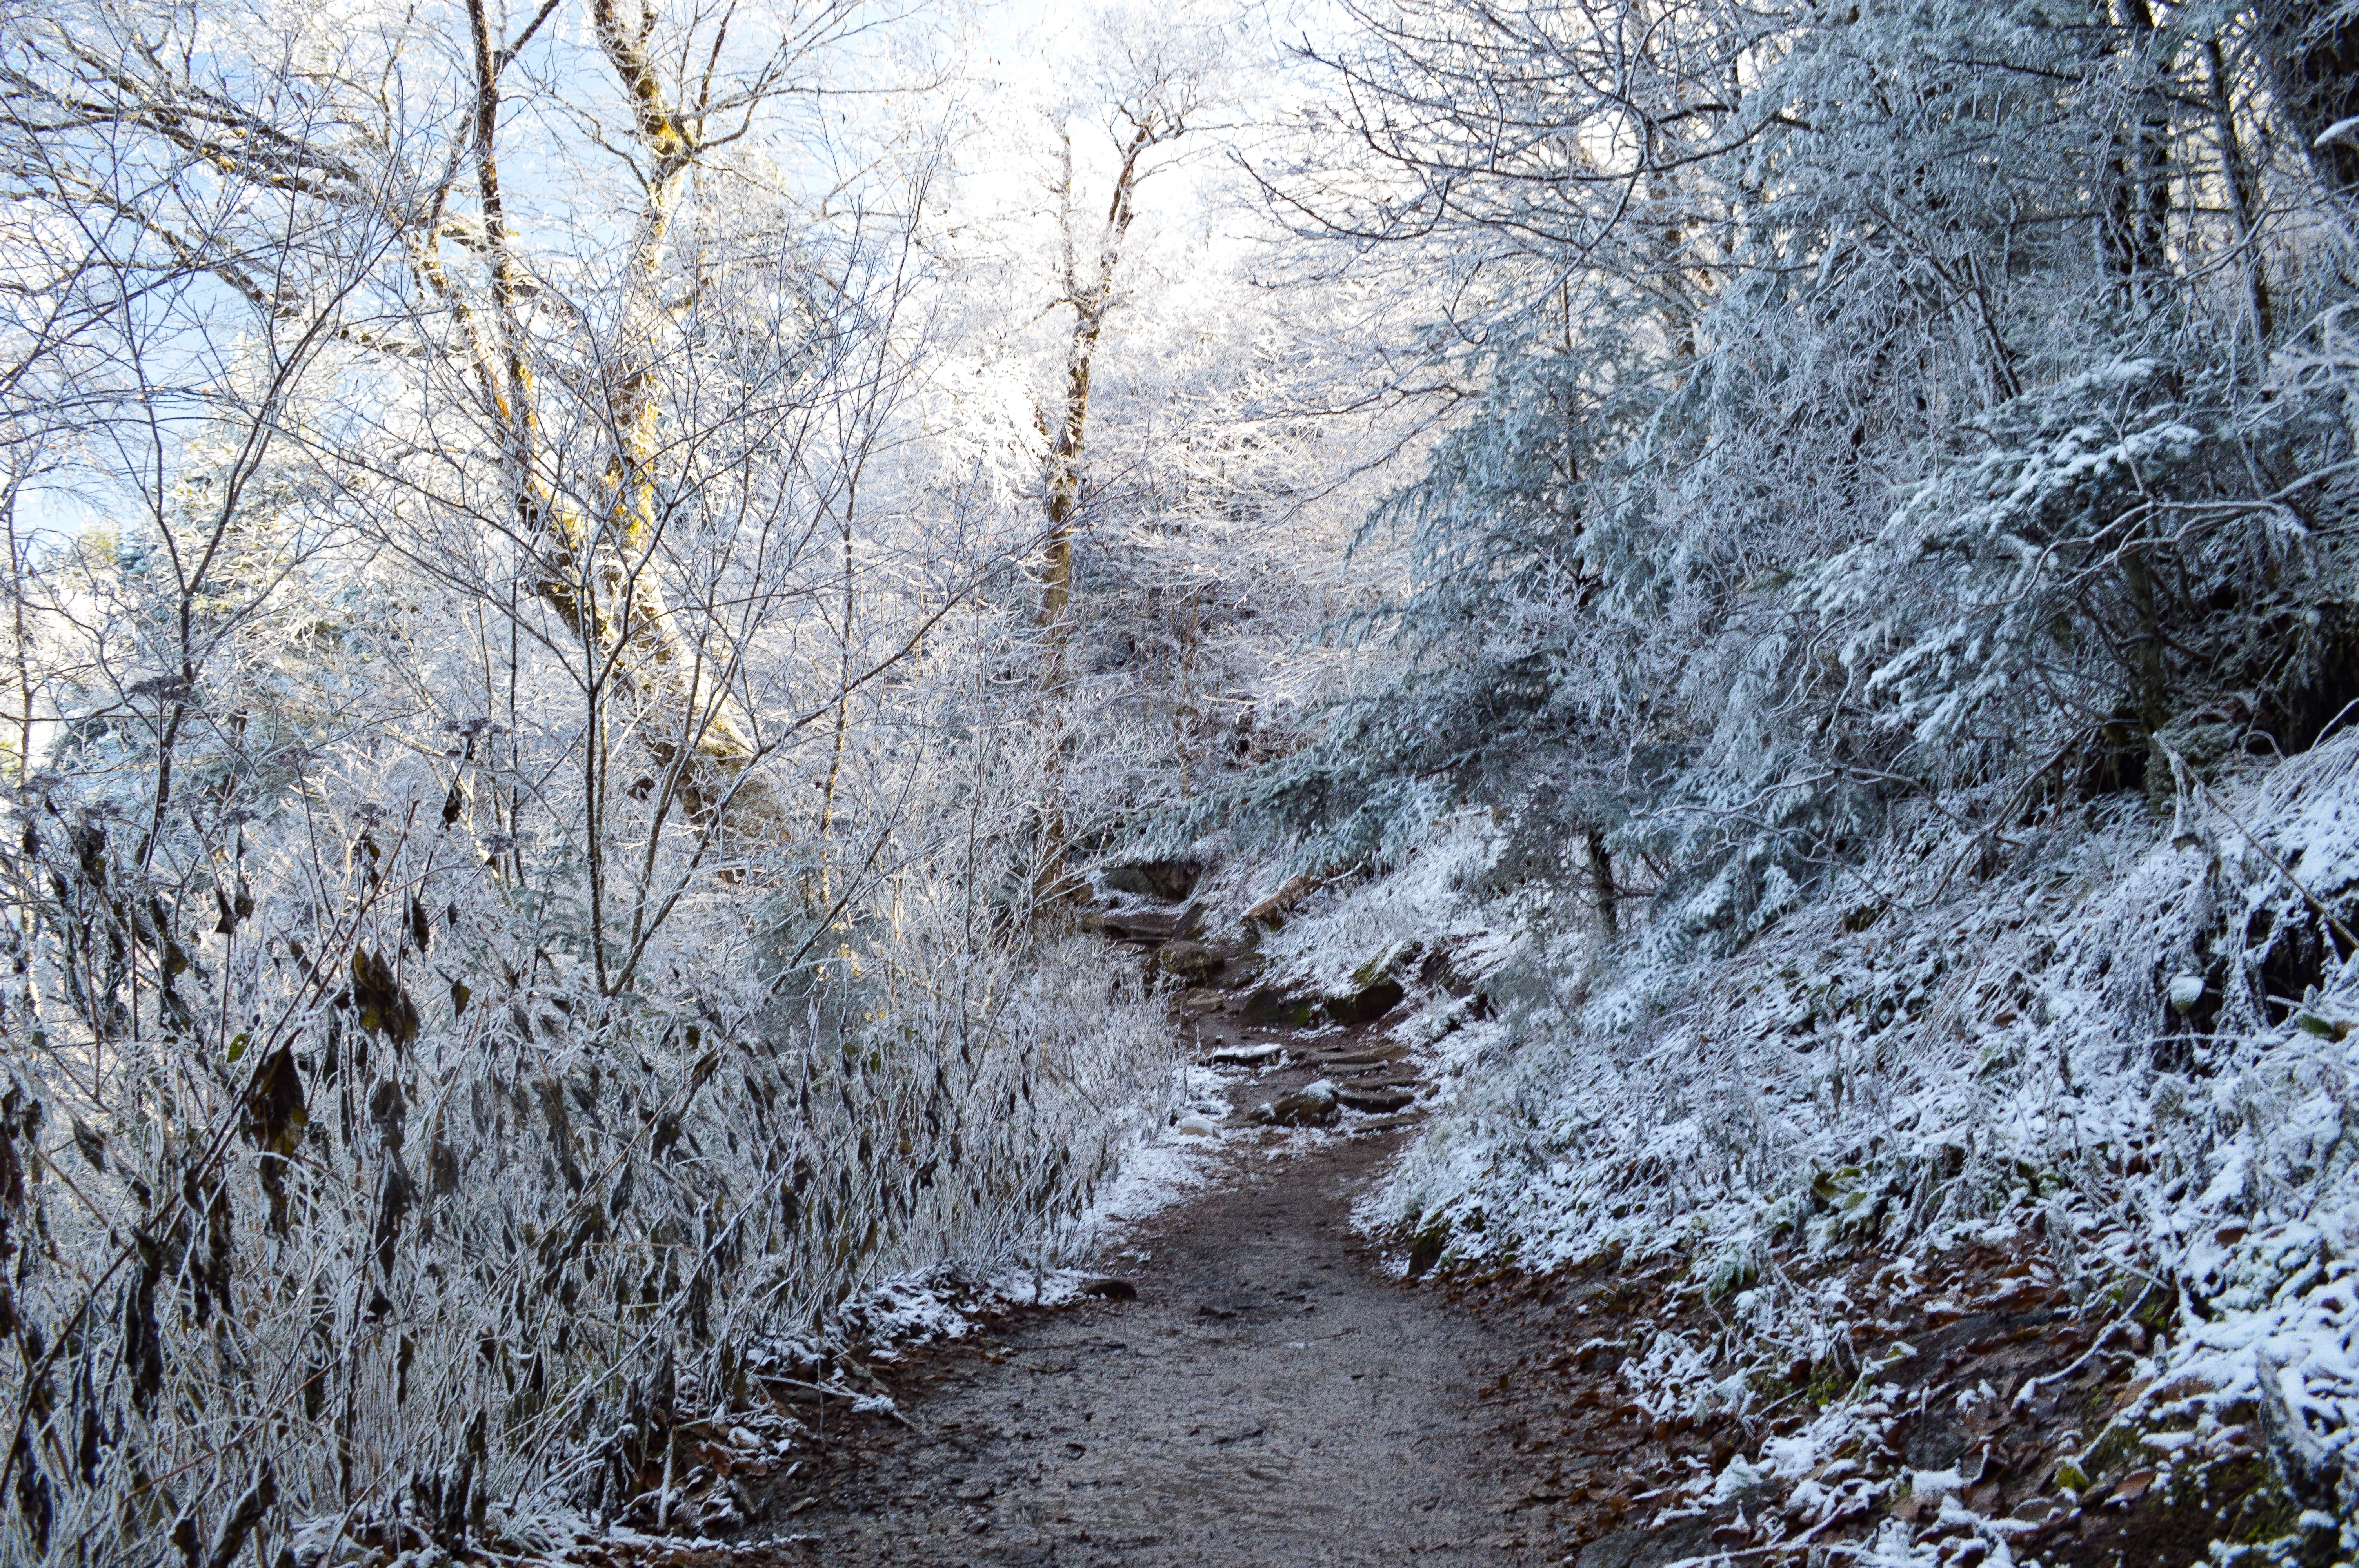 united states, great smoky mountains, snow, nature, lost, hiking